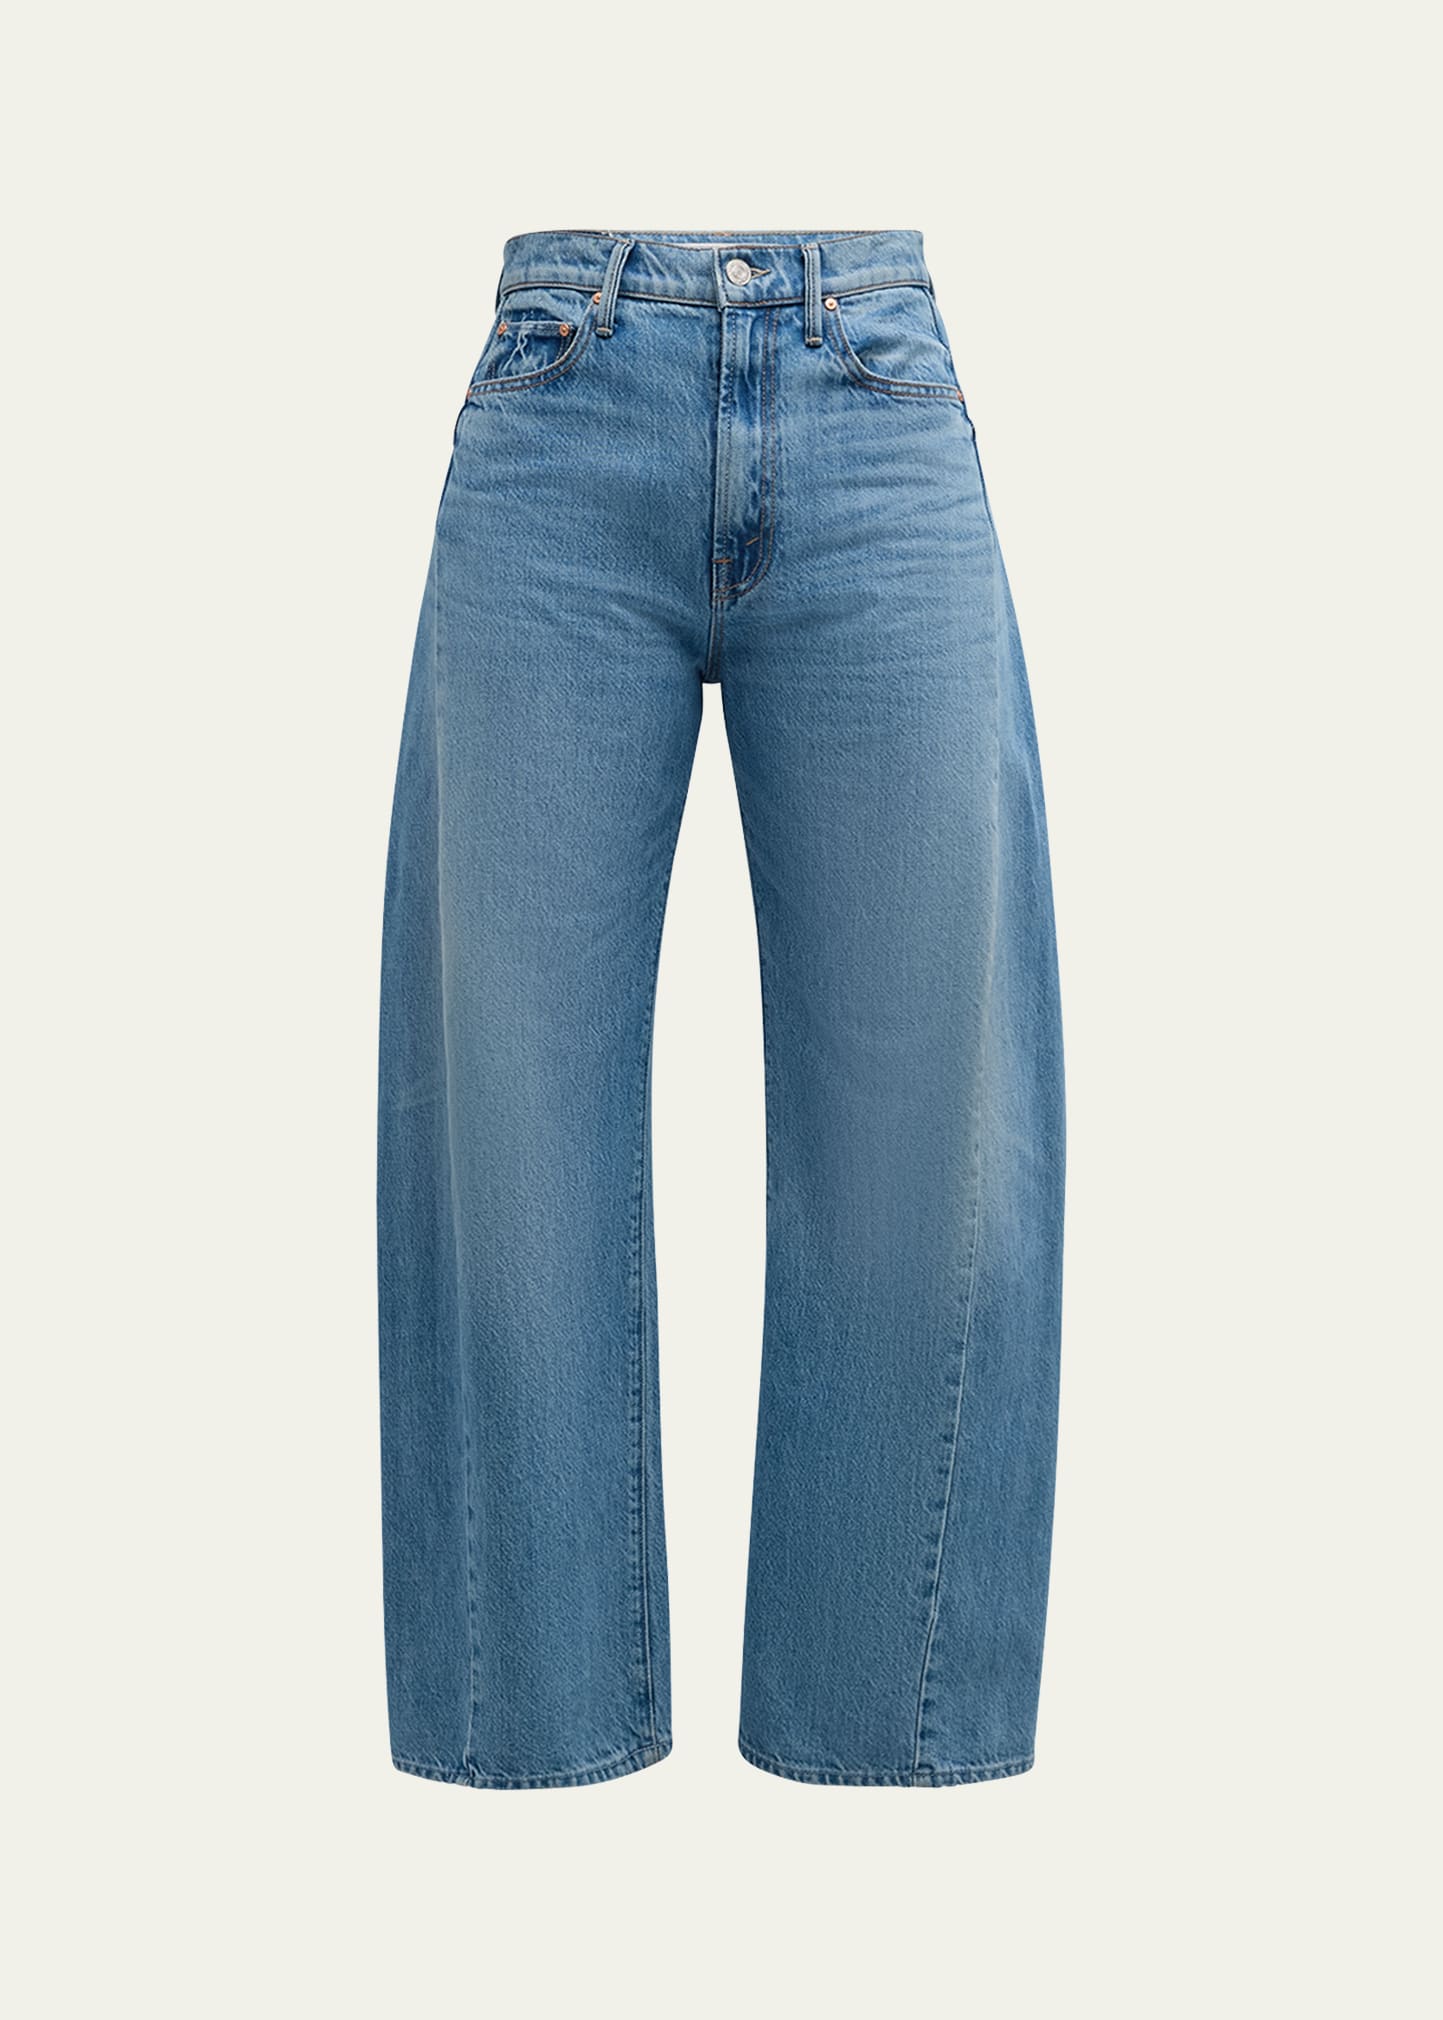 The Half Pipe Flood Jeans